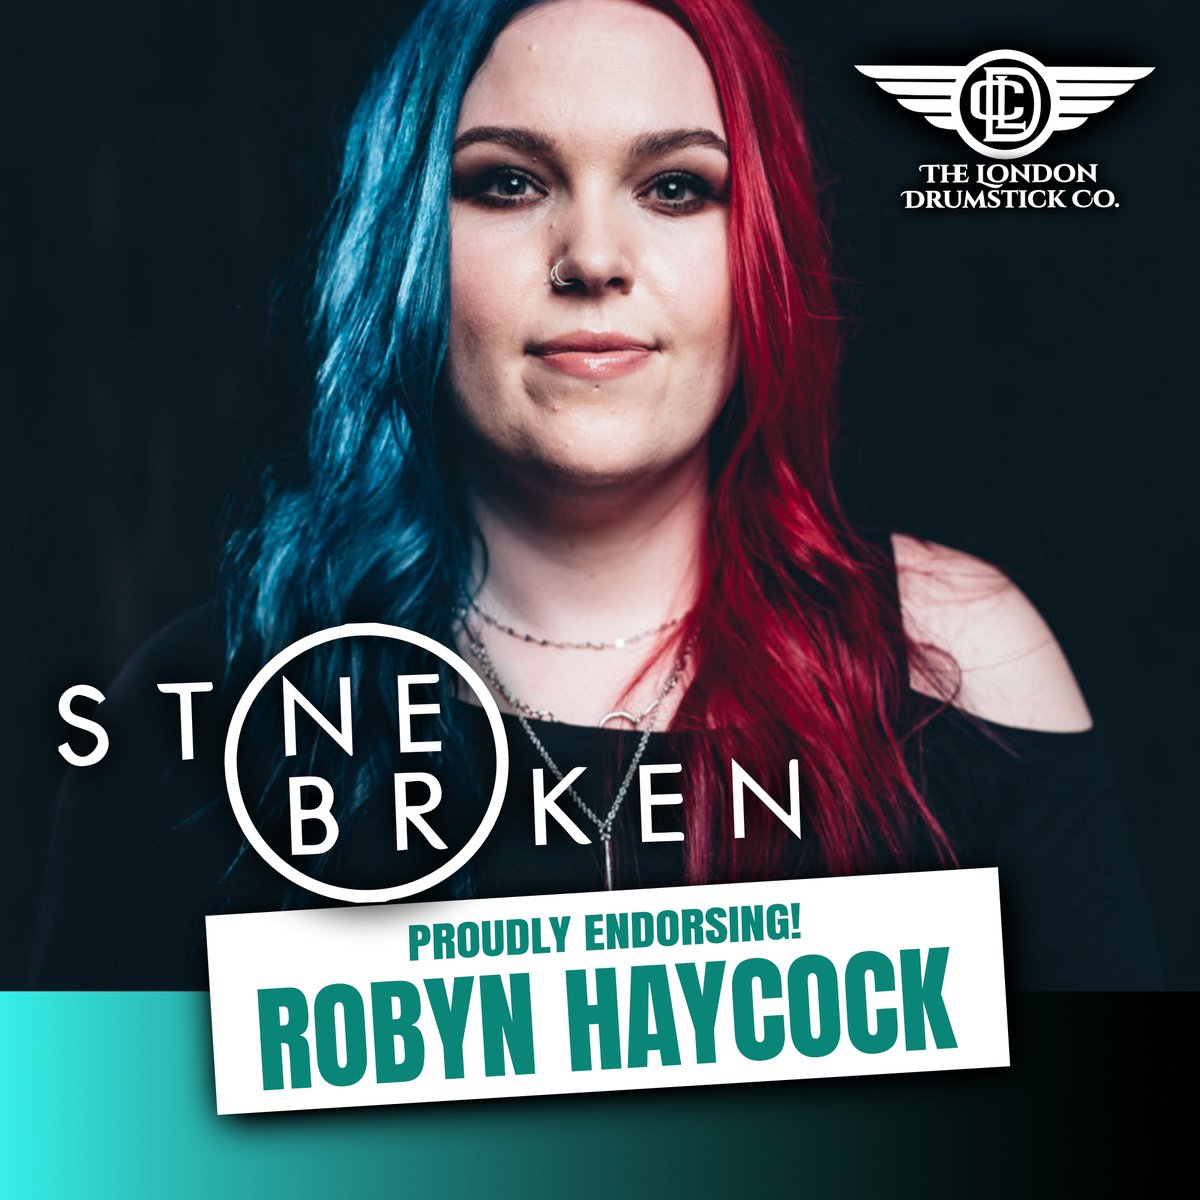 🥁🌟 Let's give a thunderous welcome to the incredible Robyn Haycock, powerhouse drummer of the UK hard rock sensation @StoneBroken_ , as our newest endorser at London Drumstick Company! 🤘💥 #WelcomeRobyn #LondonDrumstickCo #StoneBroken #HardRock #FemaleDrummer